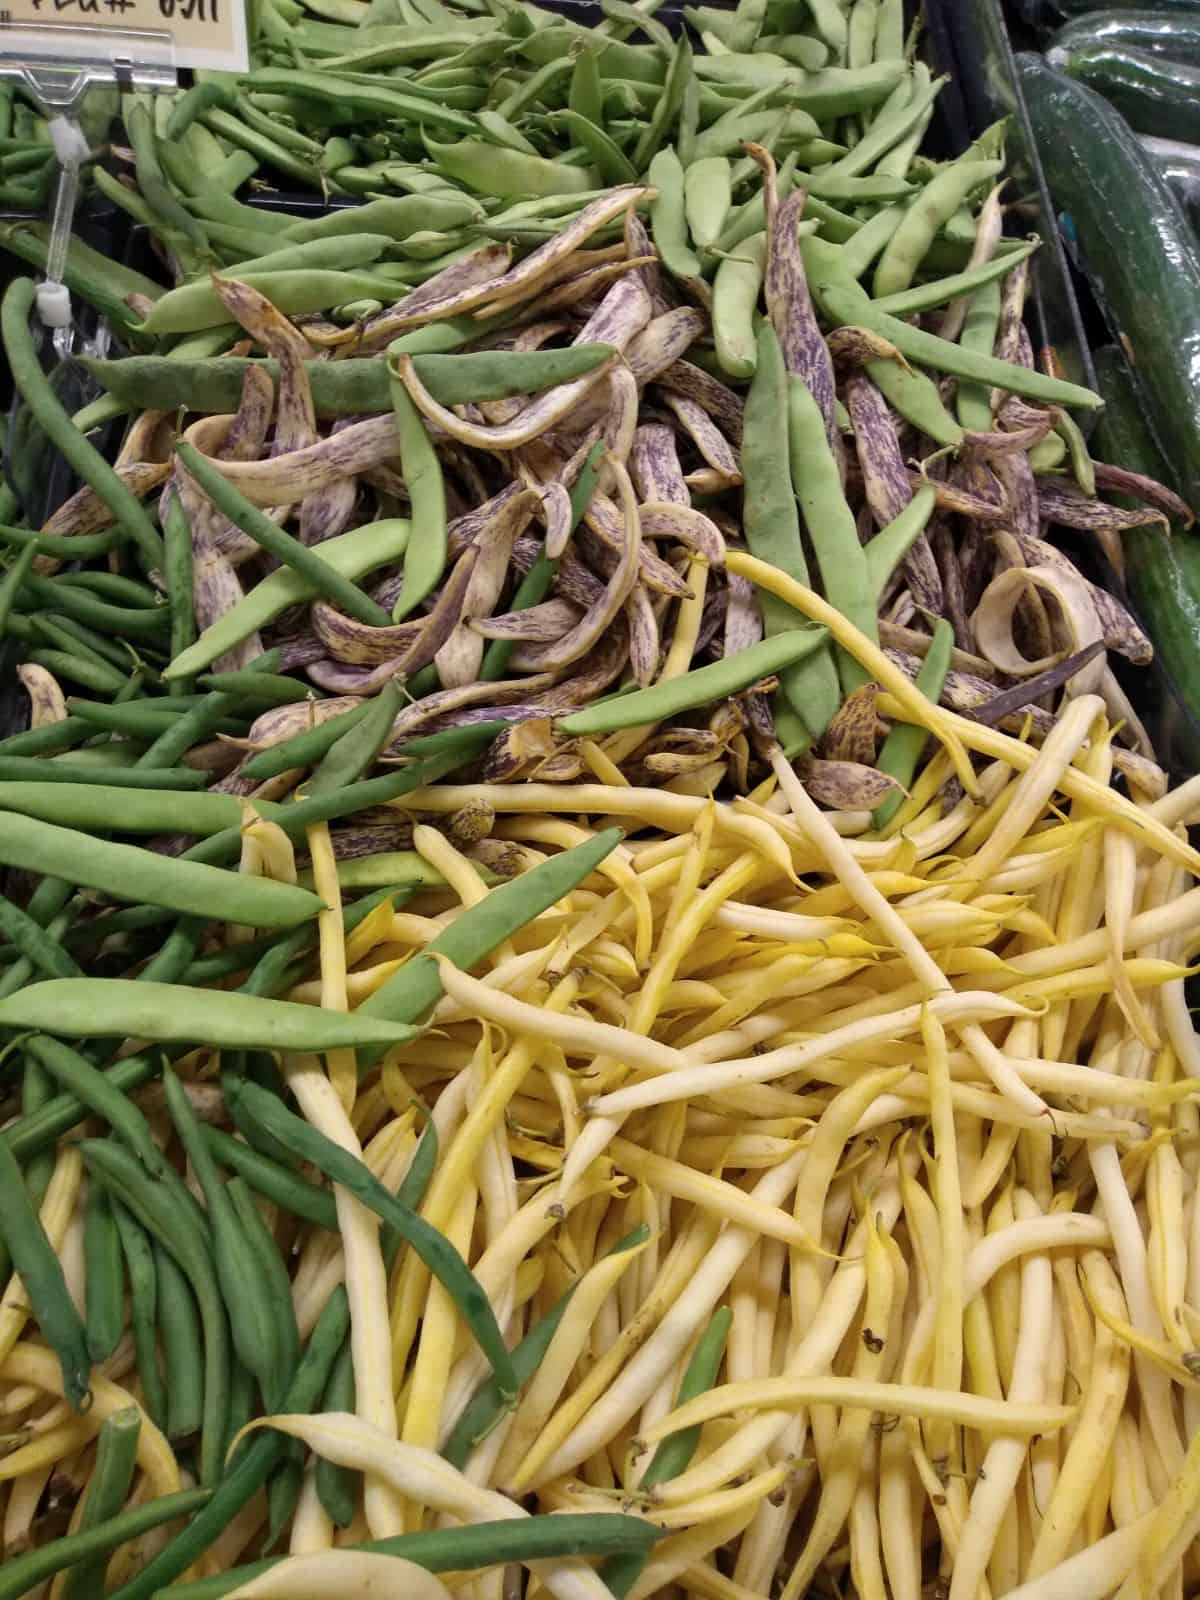 A display at a grocery store mixed with green beans, flat Italian green beans, yellow wax beans, and Dragon's tongue beans that are yellow with purple streaks 